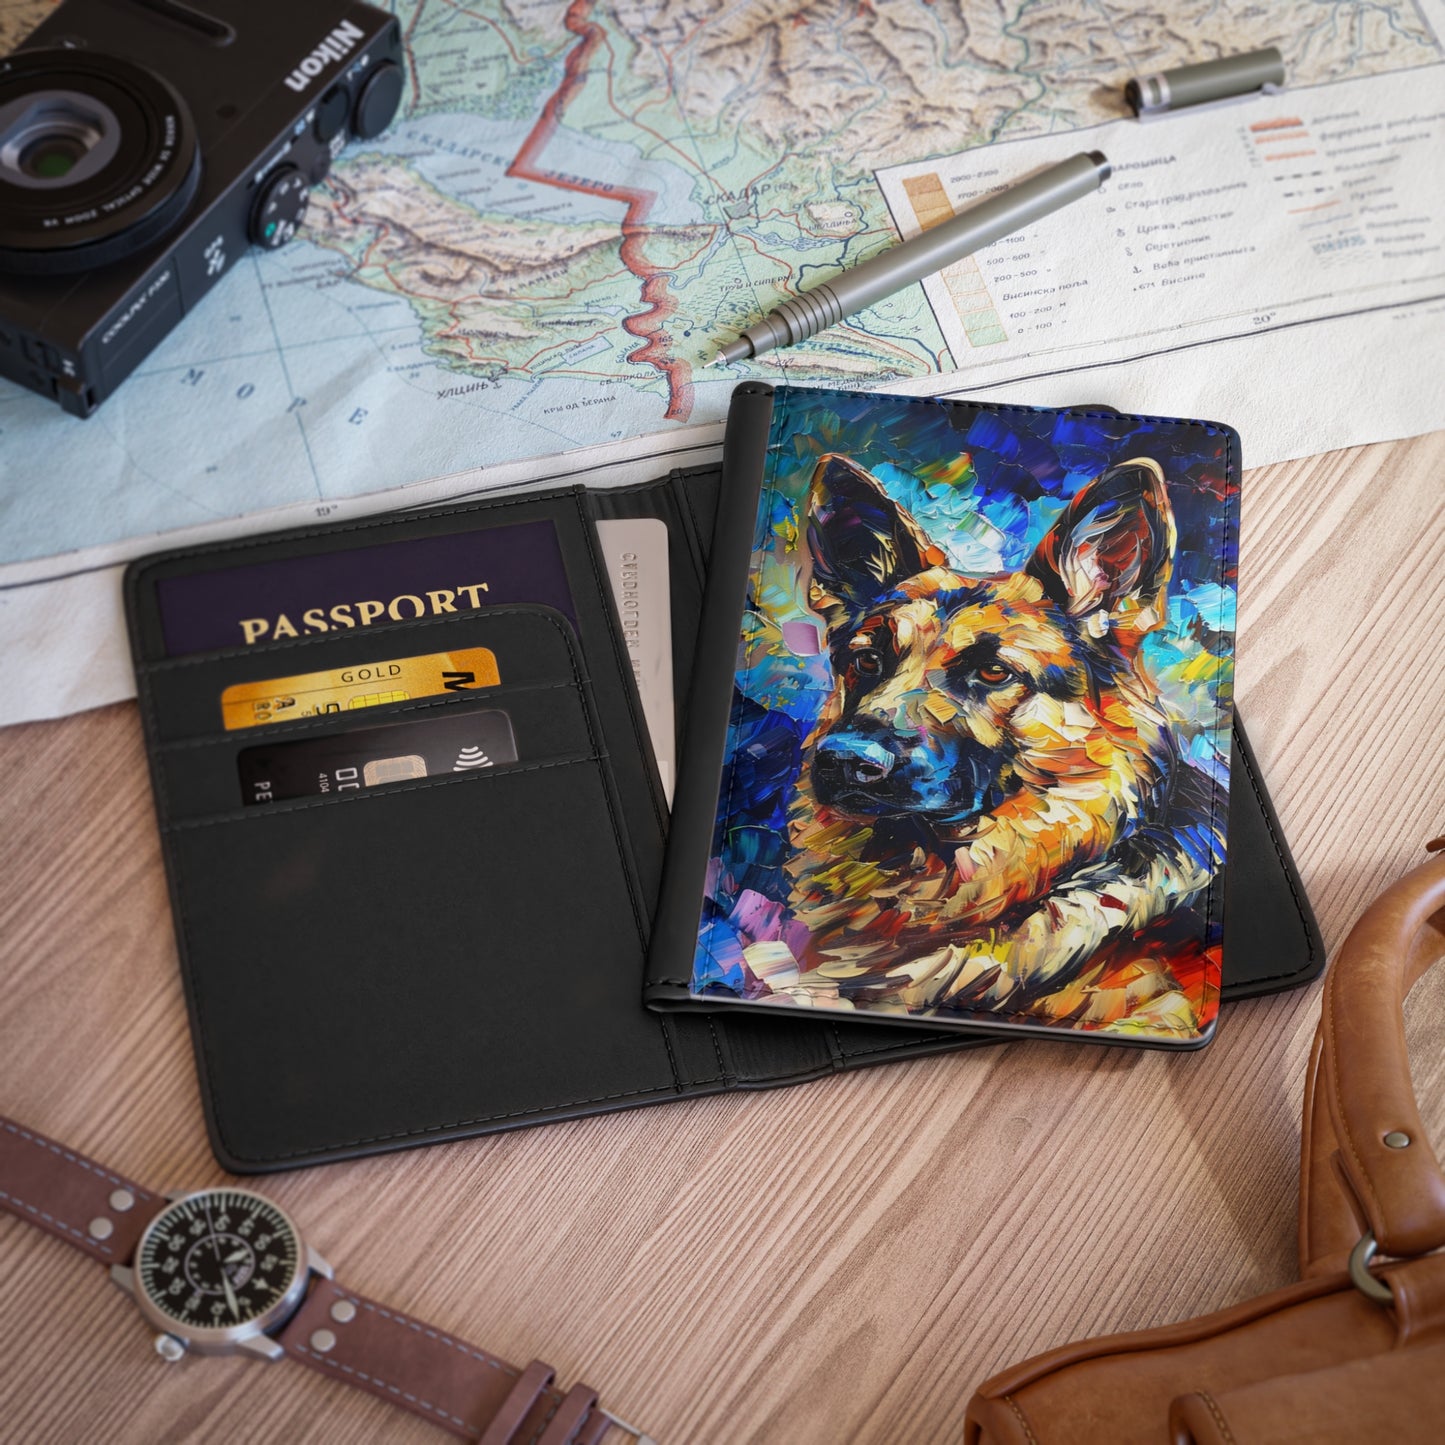 Passport Cover, Faux Leather, German Shepherd Design, 3.9" x 5.8", RFID Blocking, 2 Variations (Oil Painting/Watercolor)